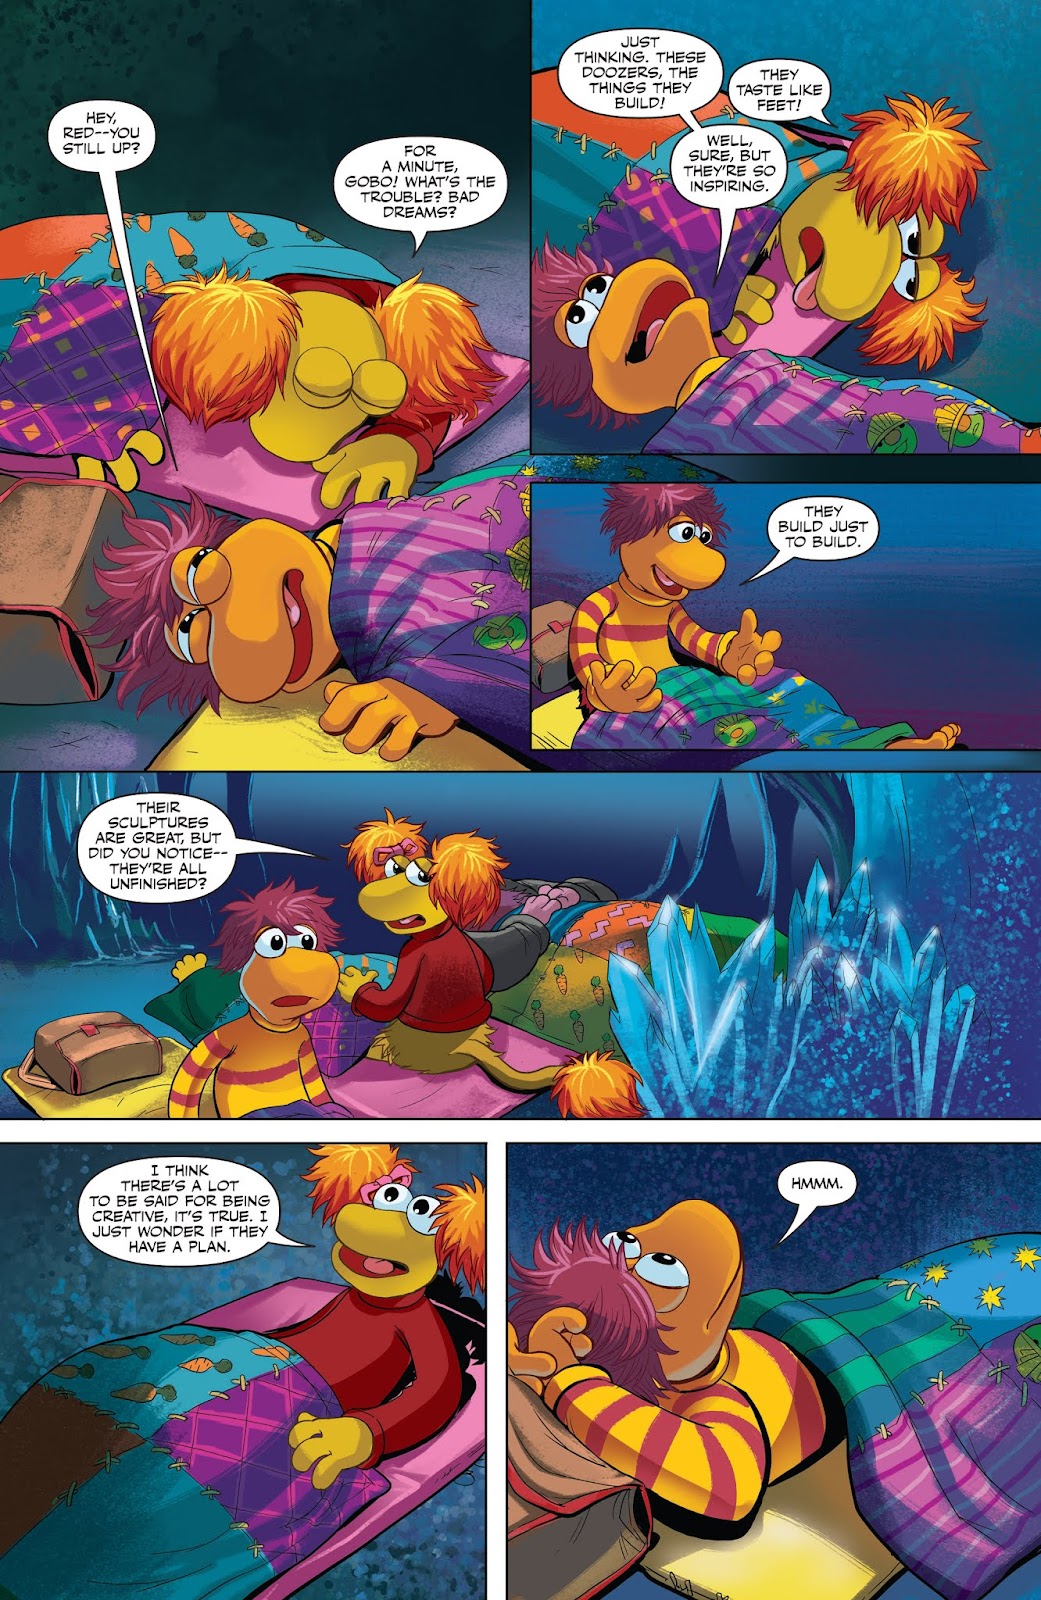 Jim Henson's Fraggle Rock: Journey to the Everspring issue 3 - Page 15